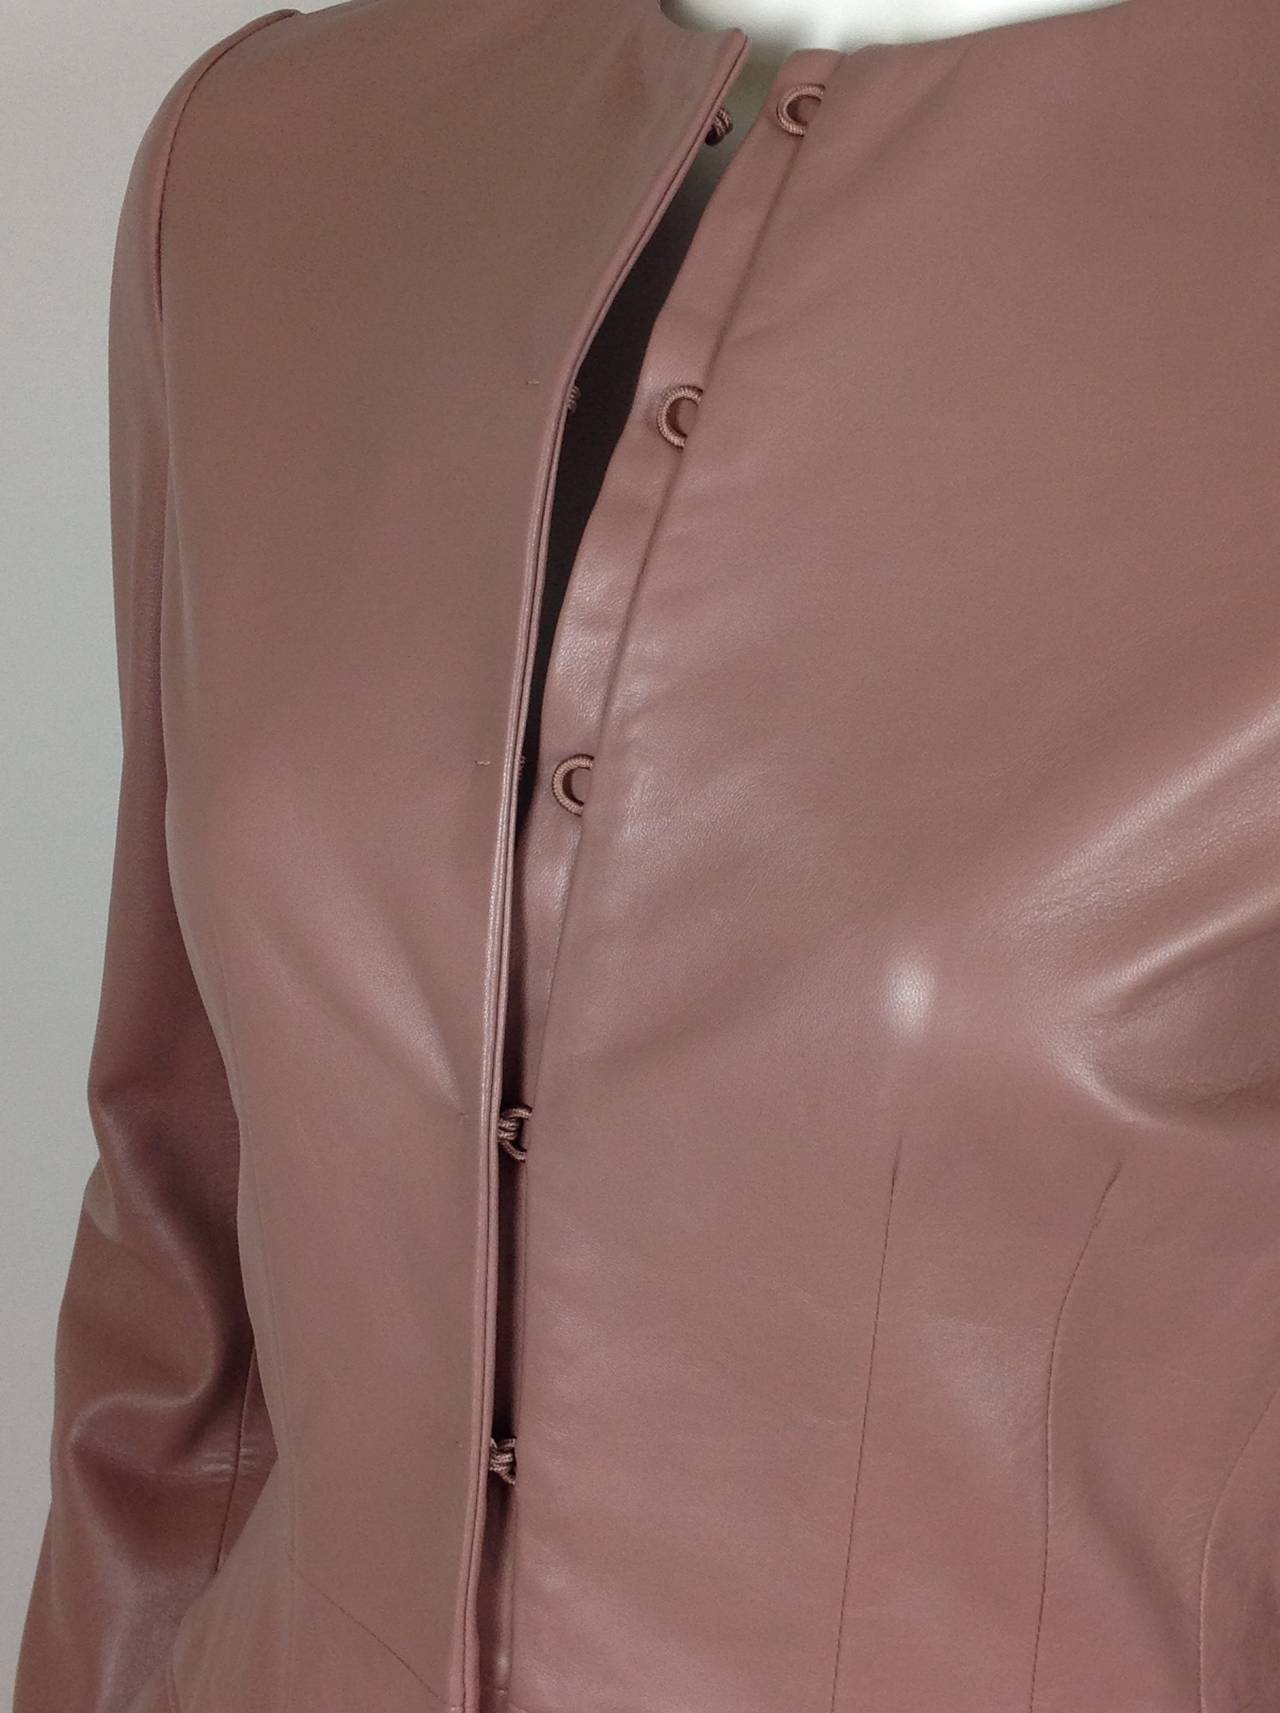 Mauve Christian Dior leather fitted coat dress              Size 4 2